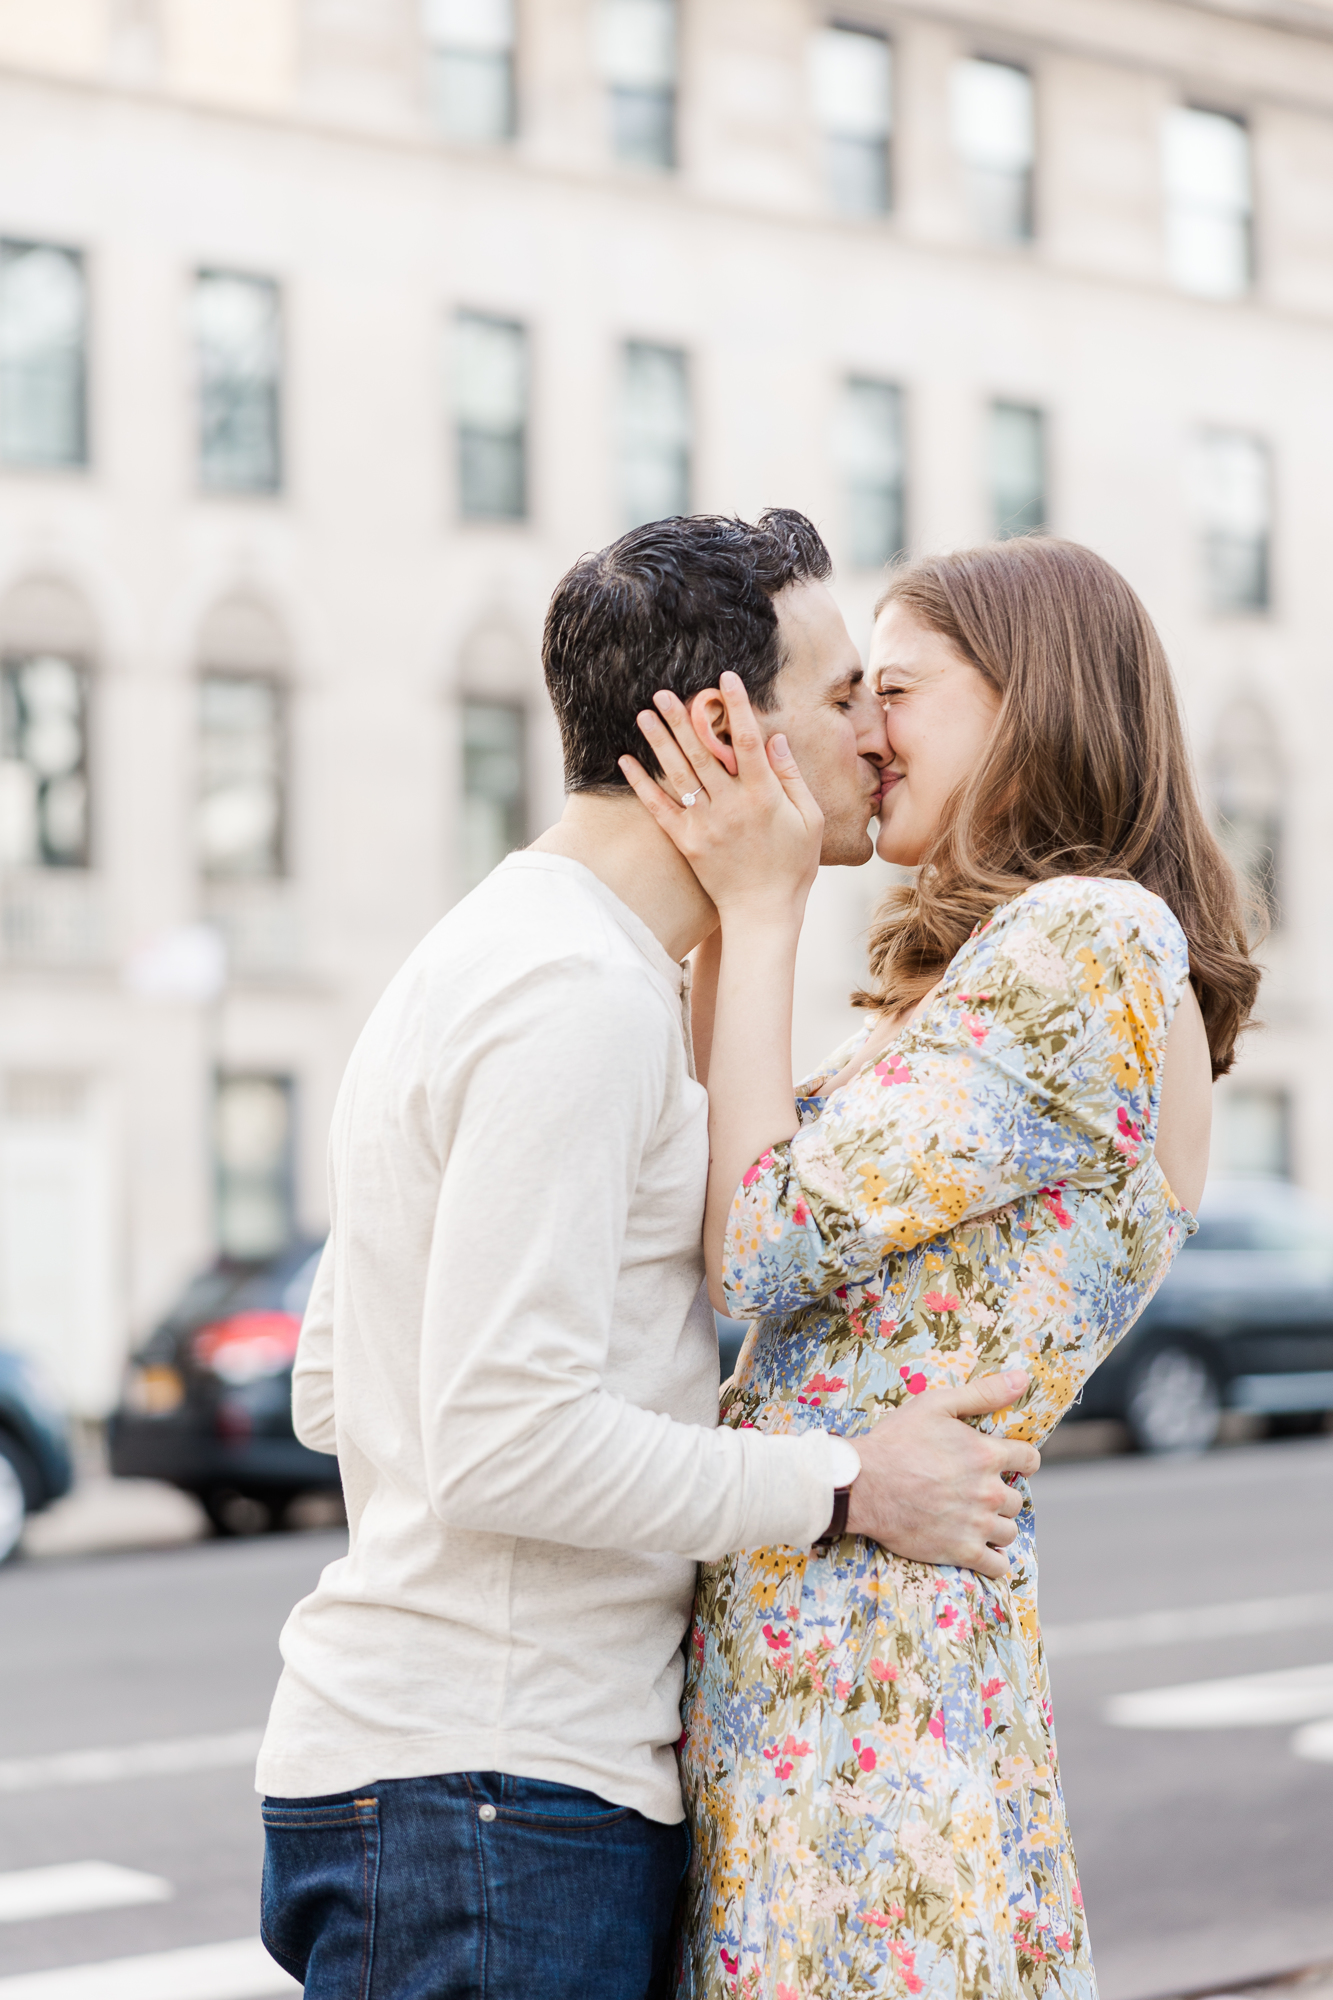 Bright Upper East Side Engagement Photo Shoot